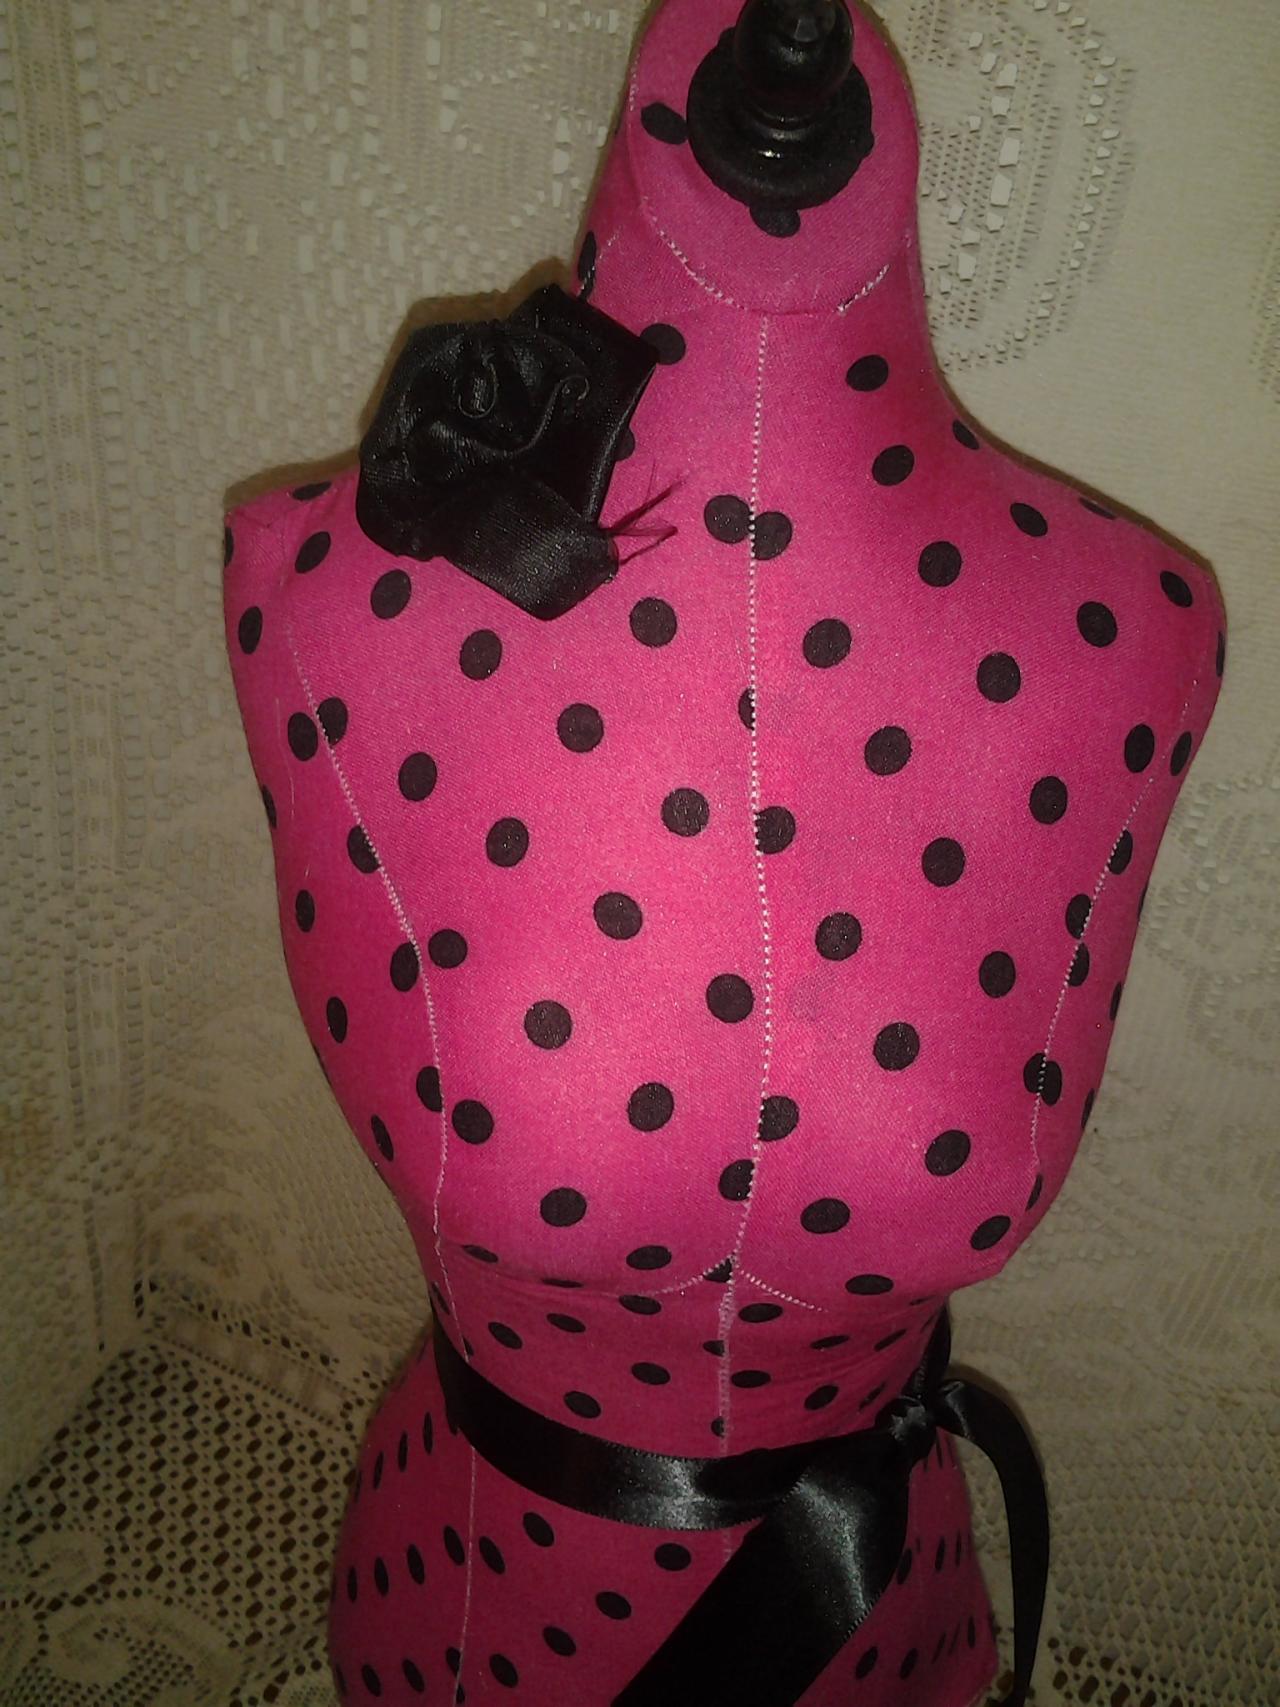 Boutique Dress Form Designs Jewelry Display, 34" Torso Great For Store Front Display Or Home Decor. White And Black Polka Dot Print.